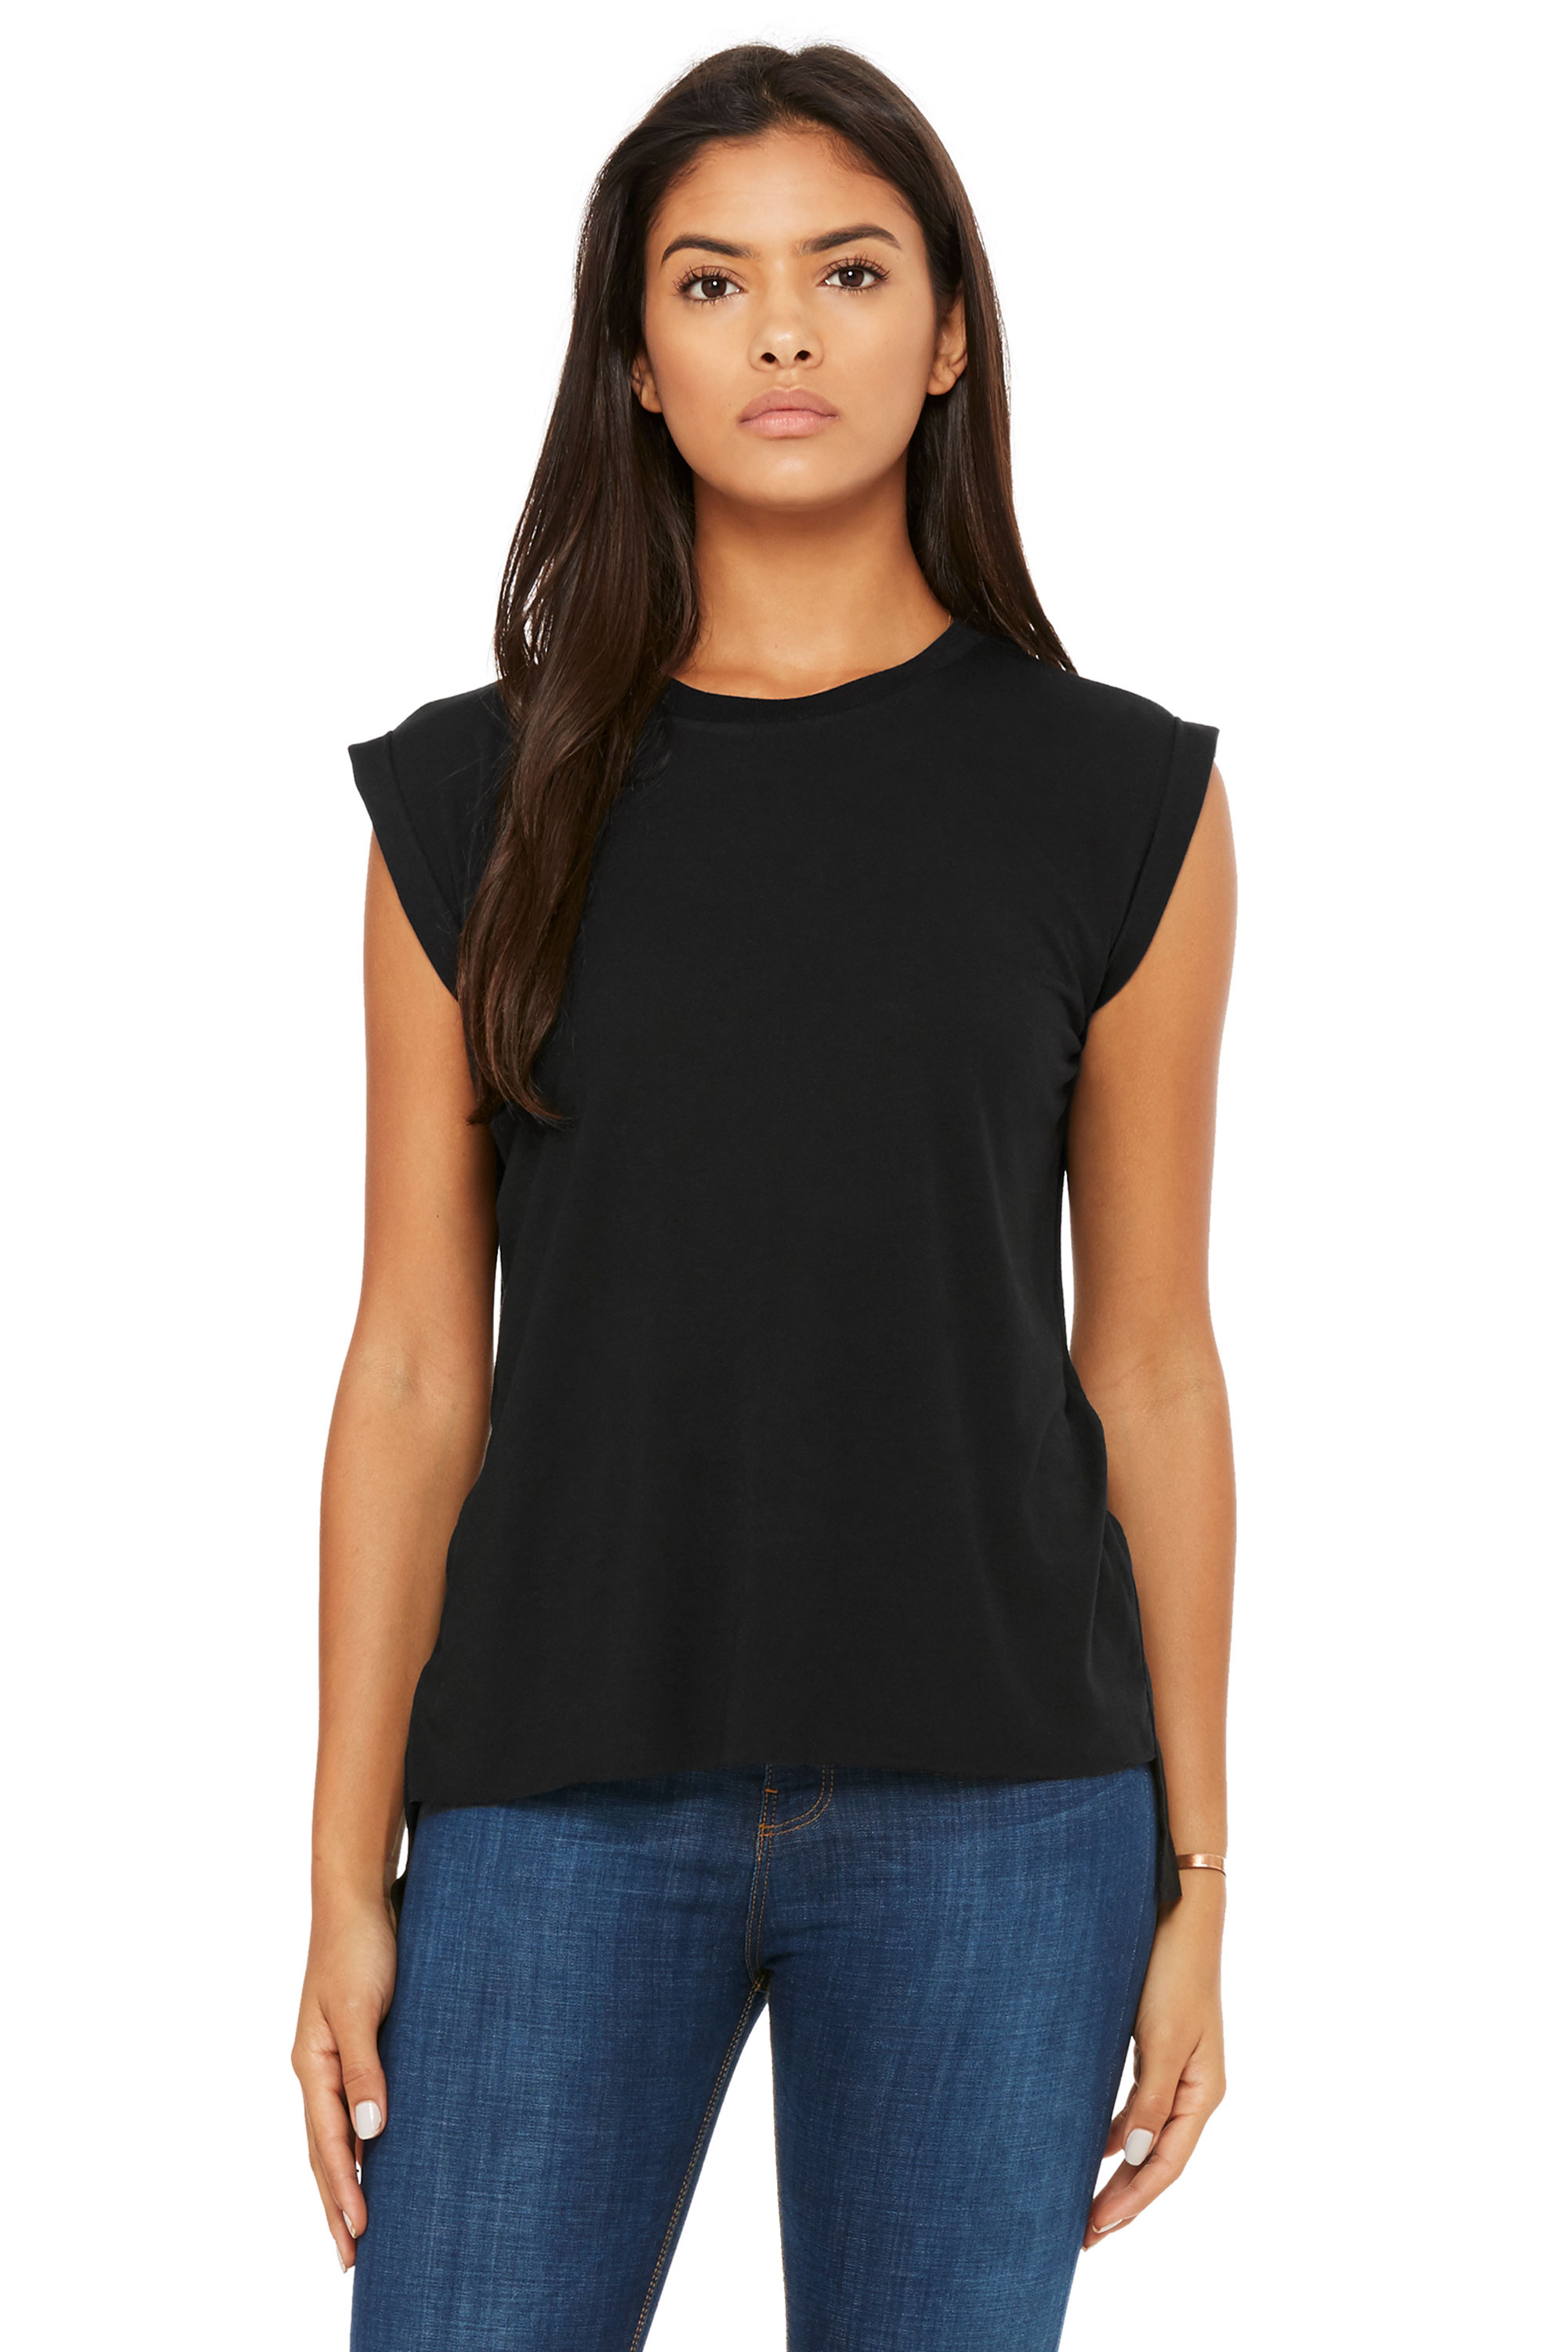 BELLA+CANVAS® 8804 Women's Flowy Muscle Tee with Rolled Cuff